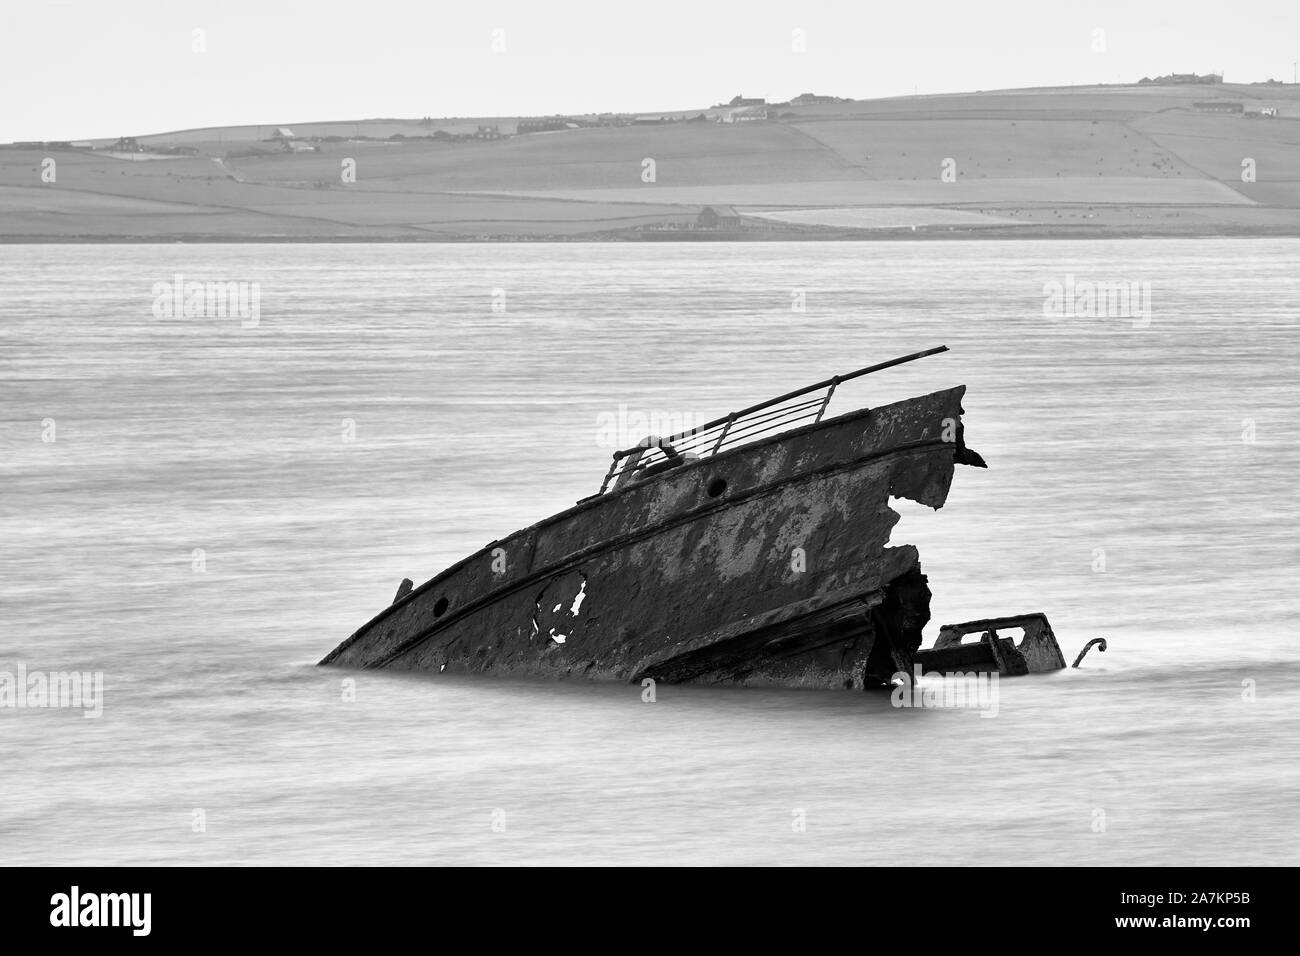 The blockship SS Reginald in the Weddell Sound, Scapa Flow, off Burray, Orkney, Scotland Stock Photo